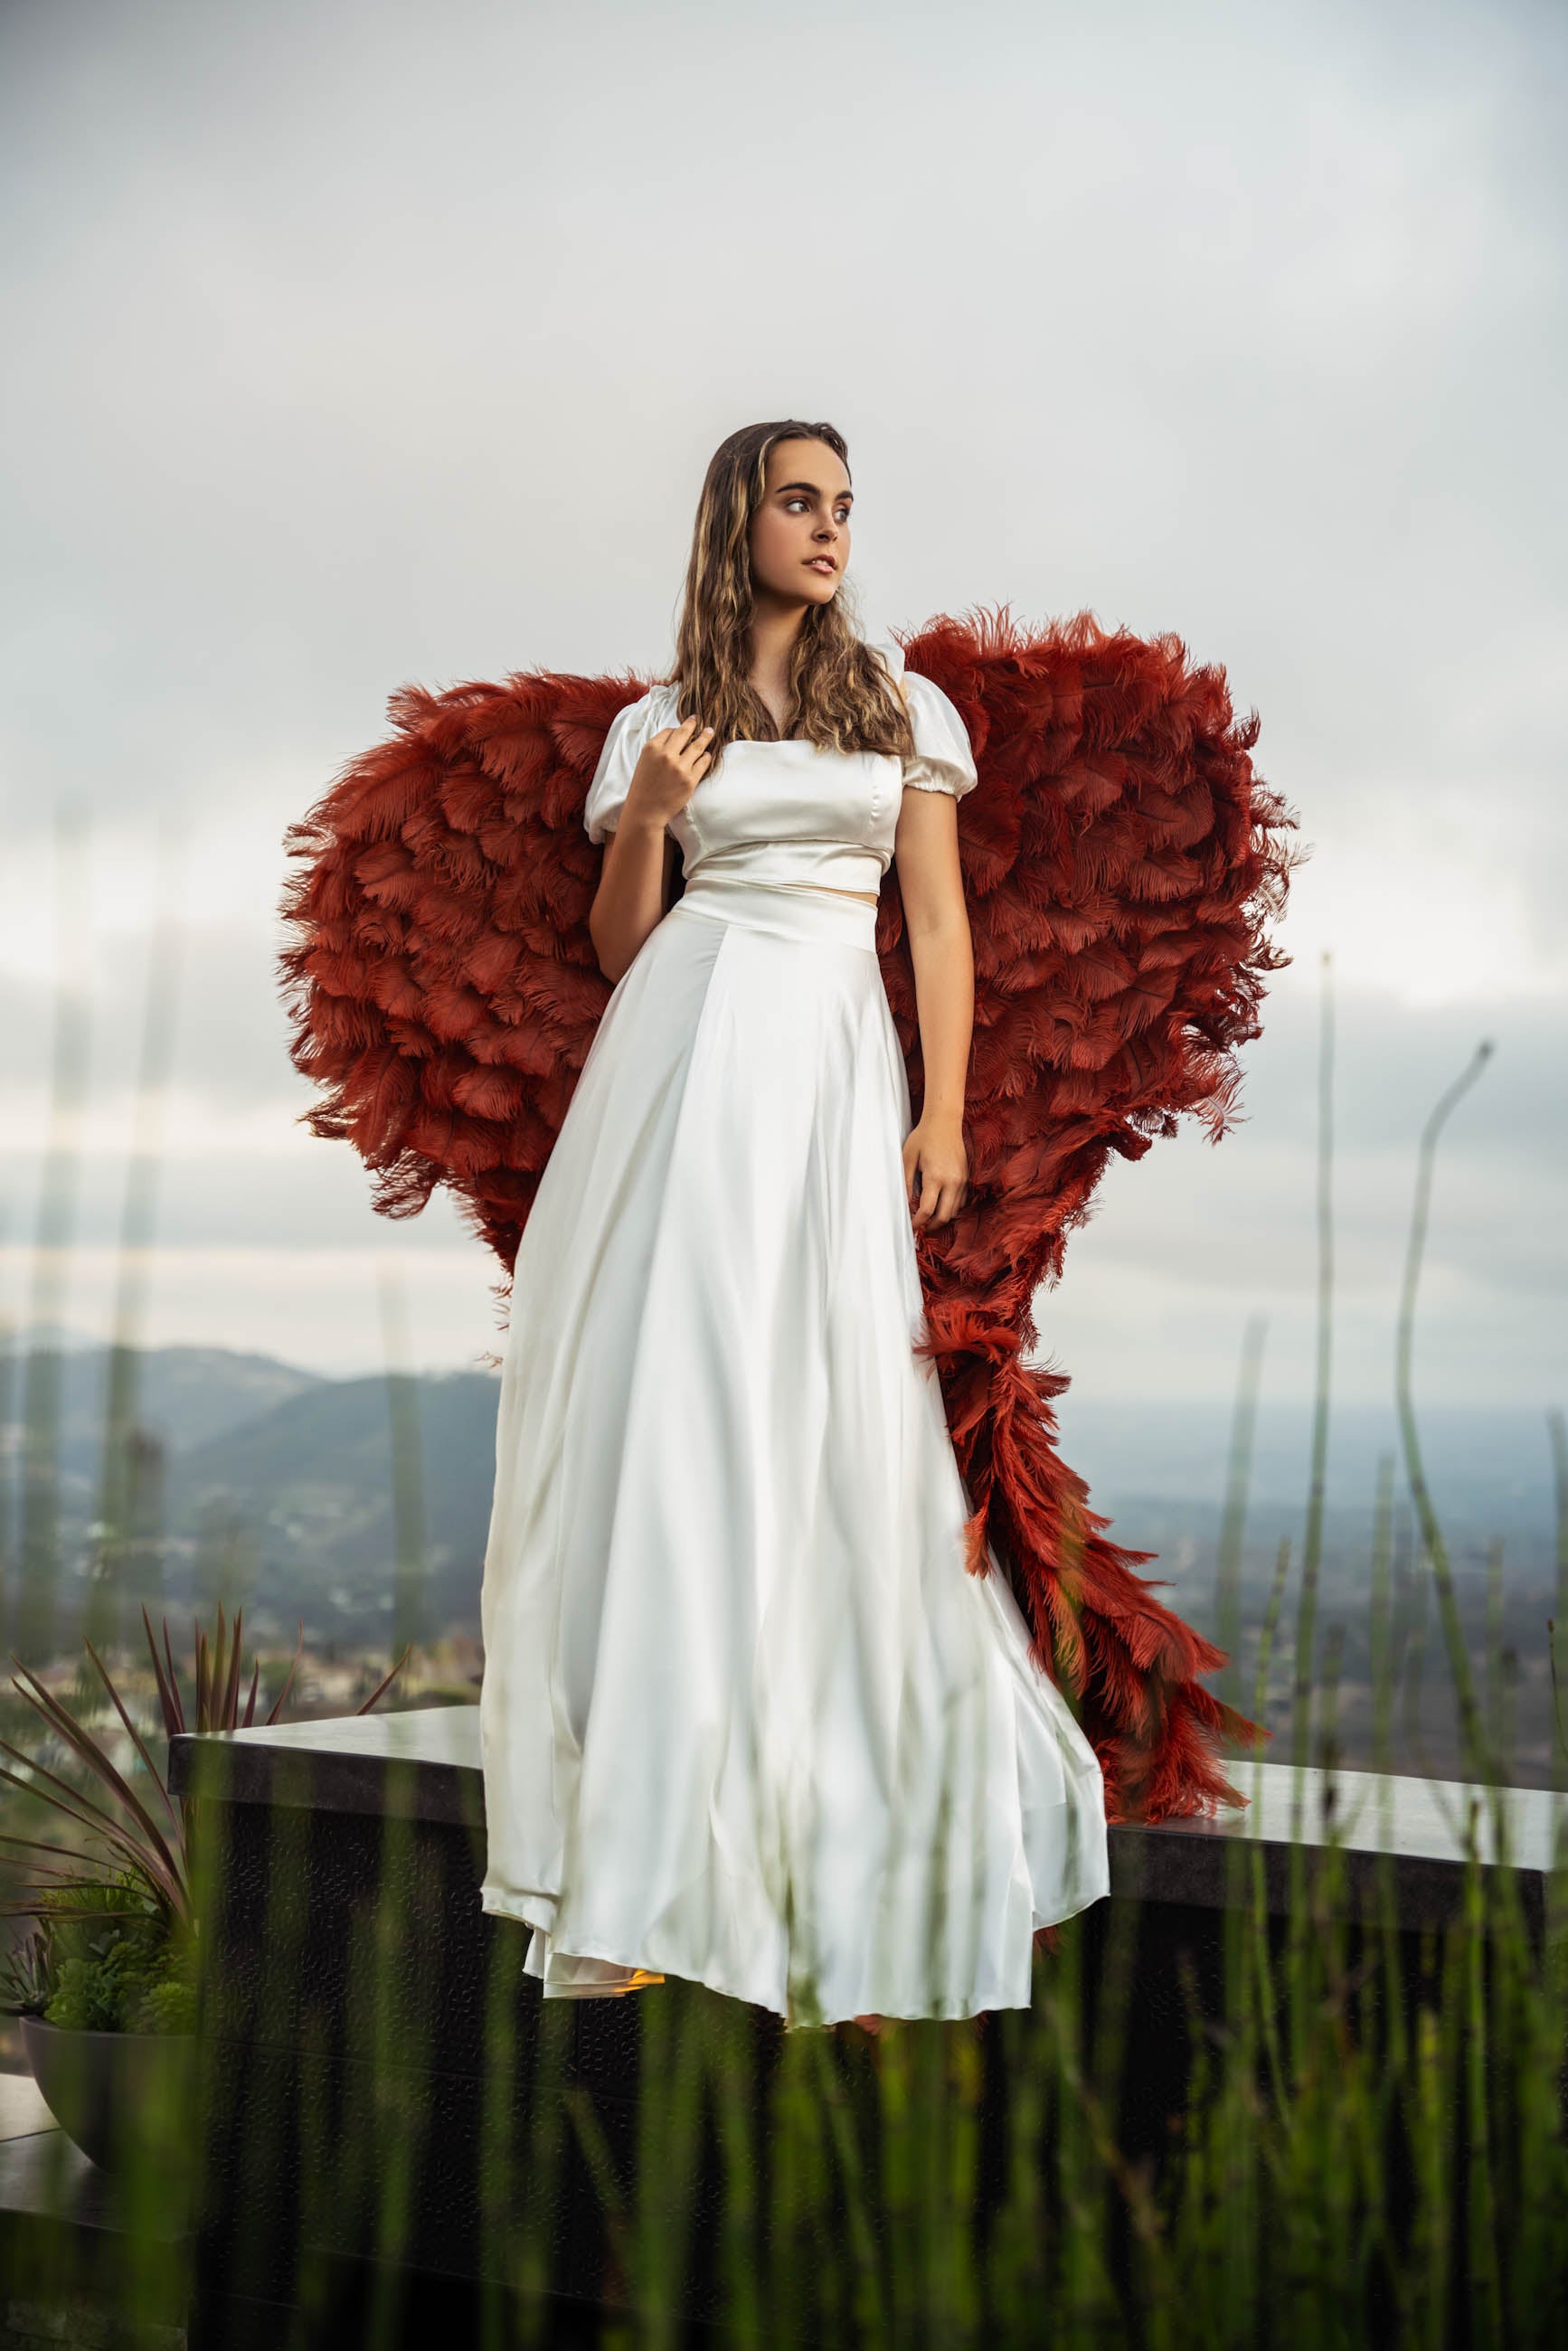 Child Size Archangel Floor Length Wings ™️ with Adjustable Corset